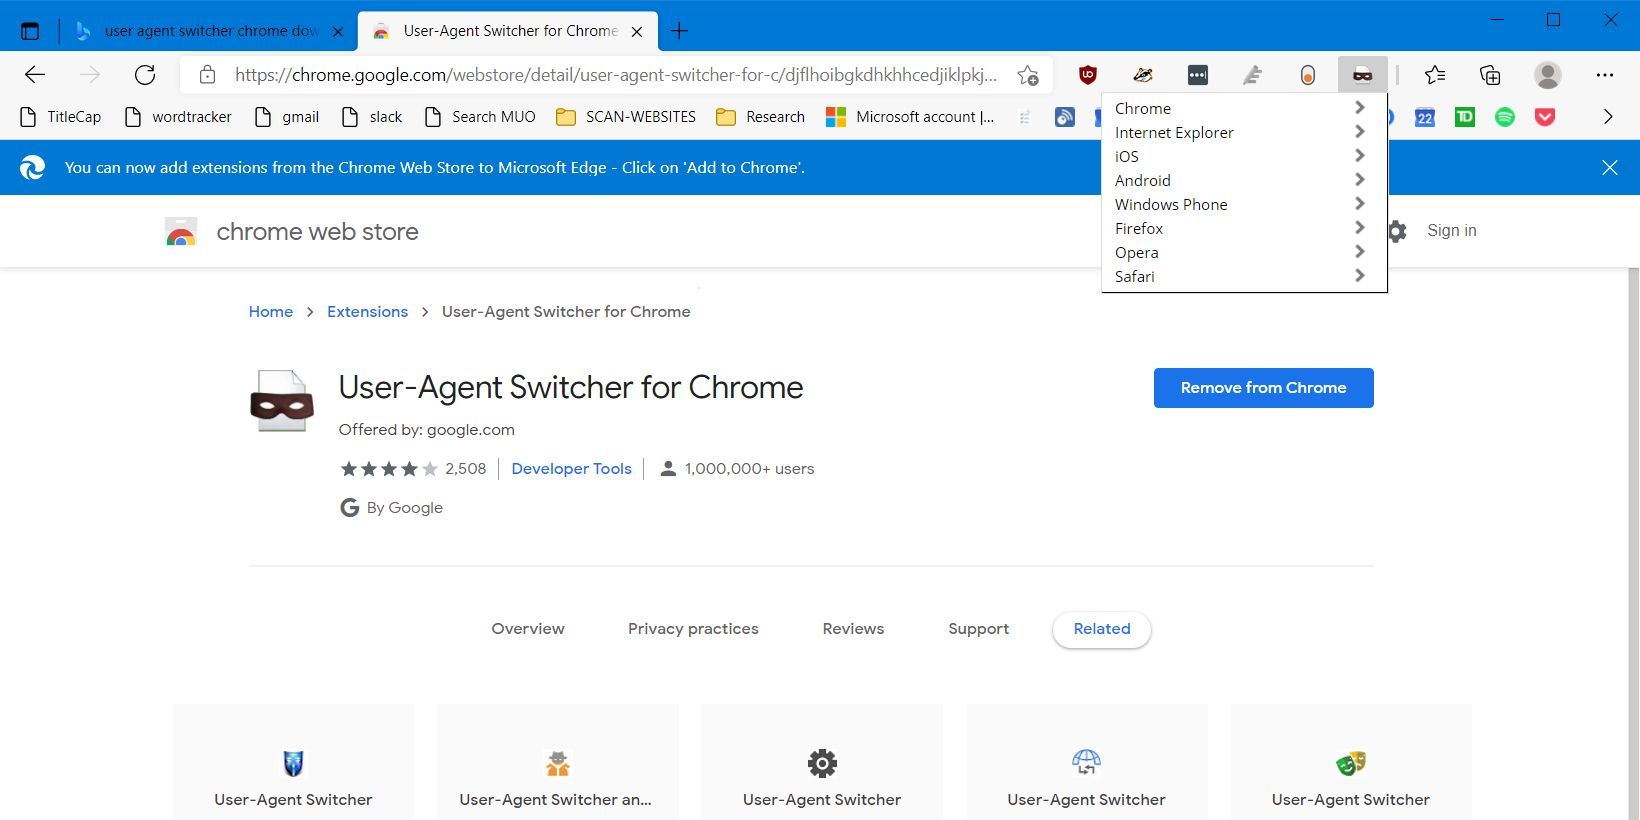 user-agent-switcher can improve website load times